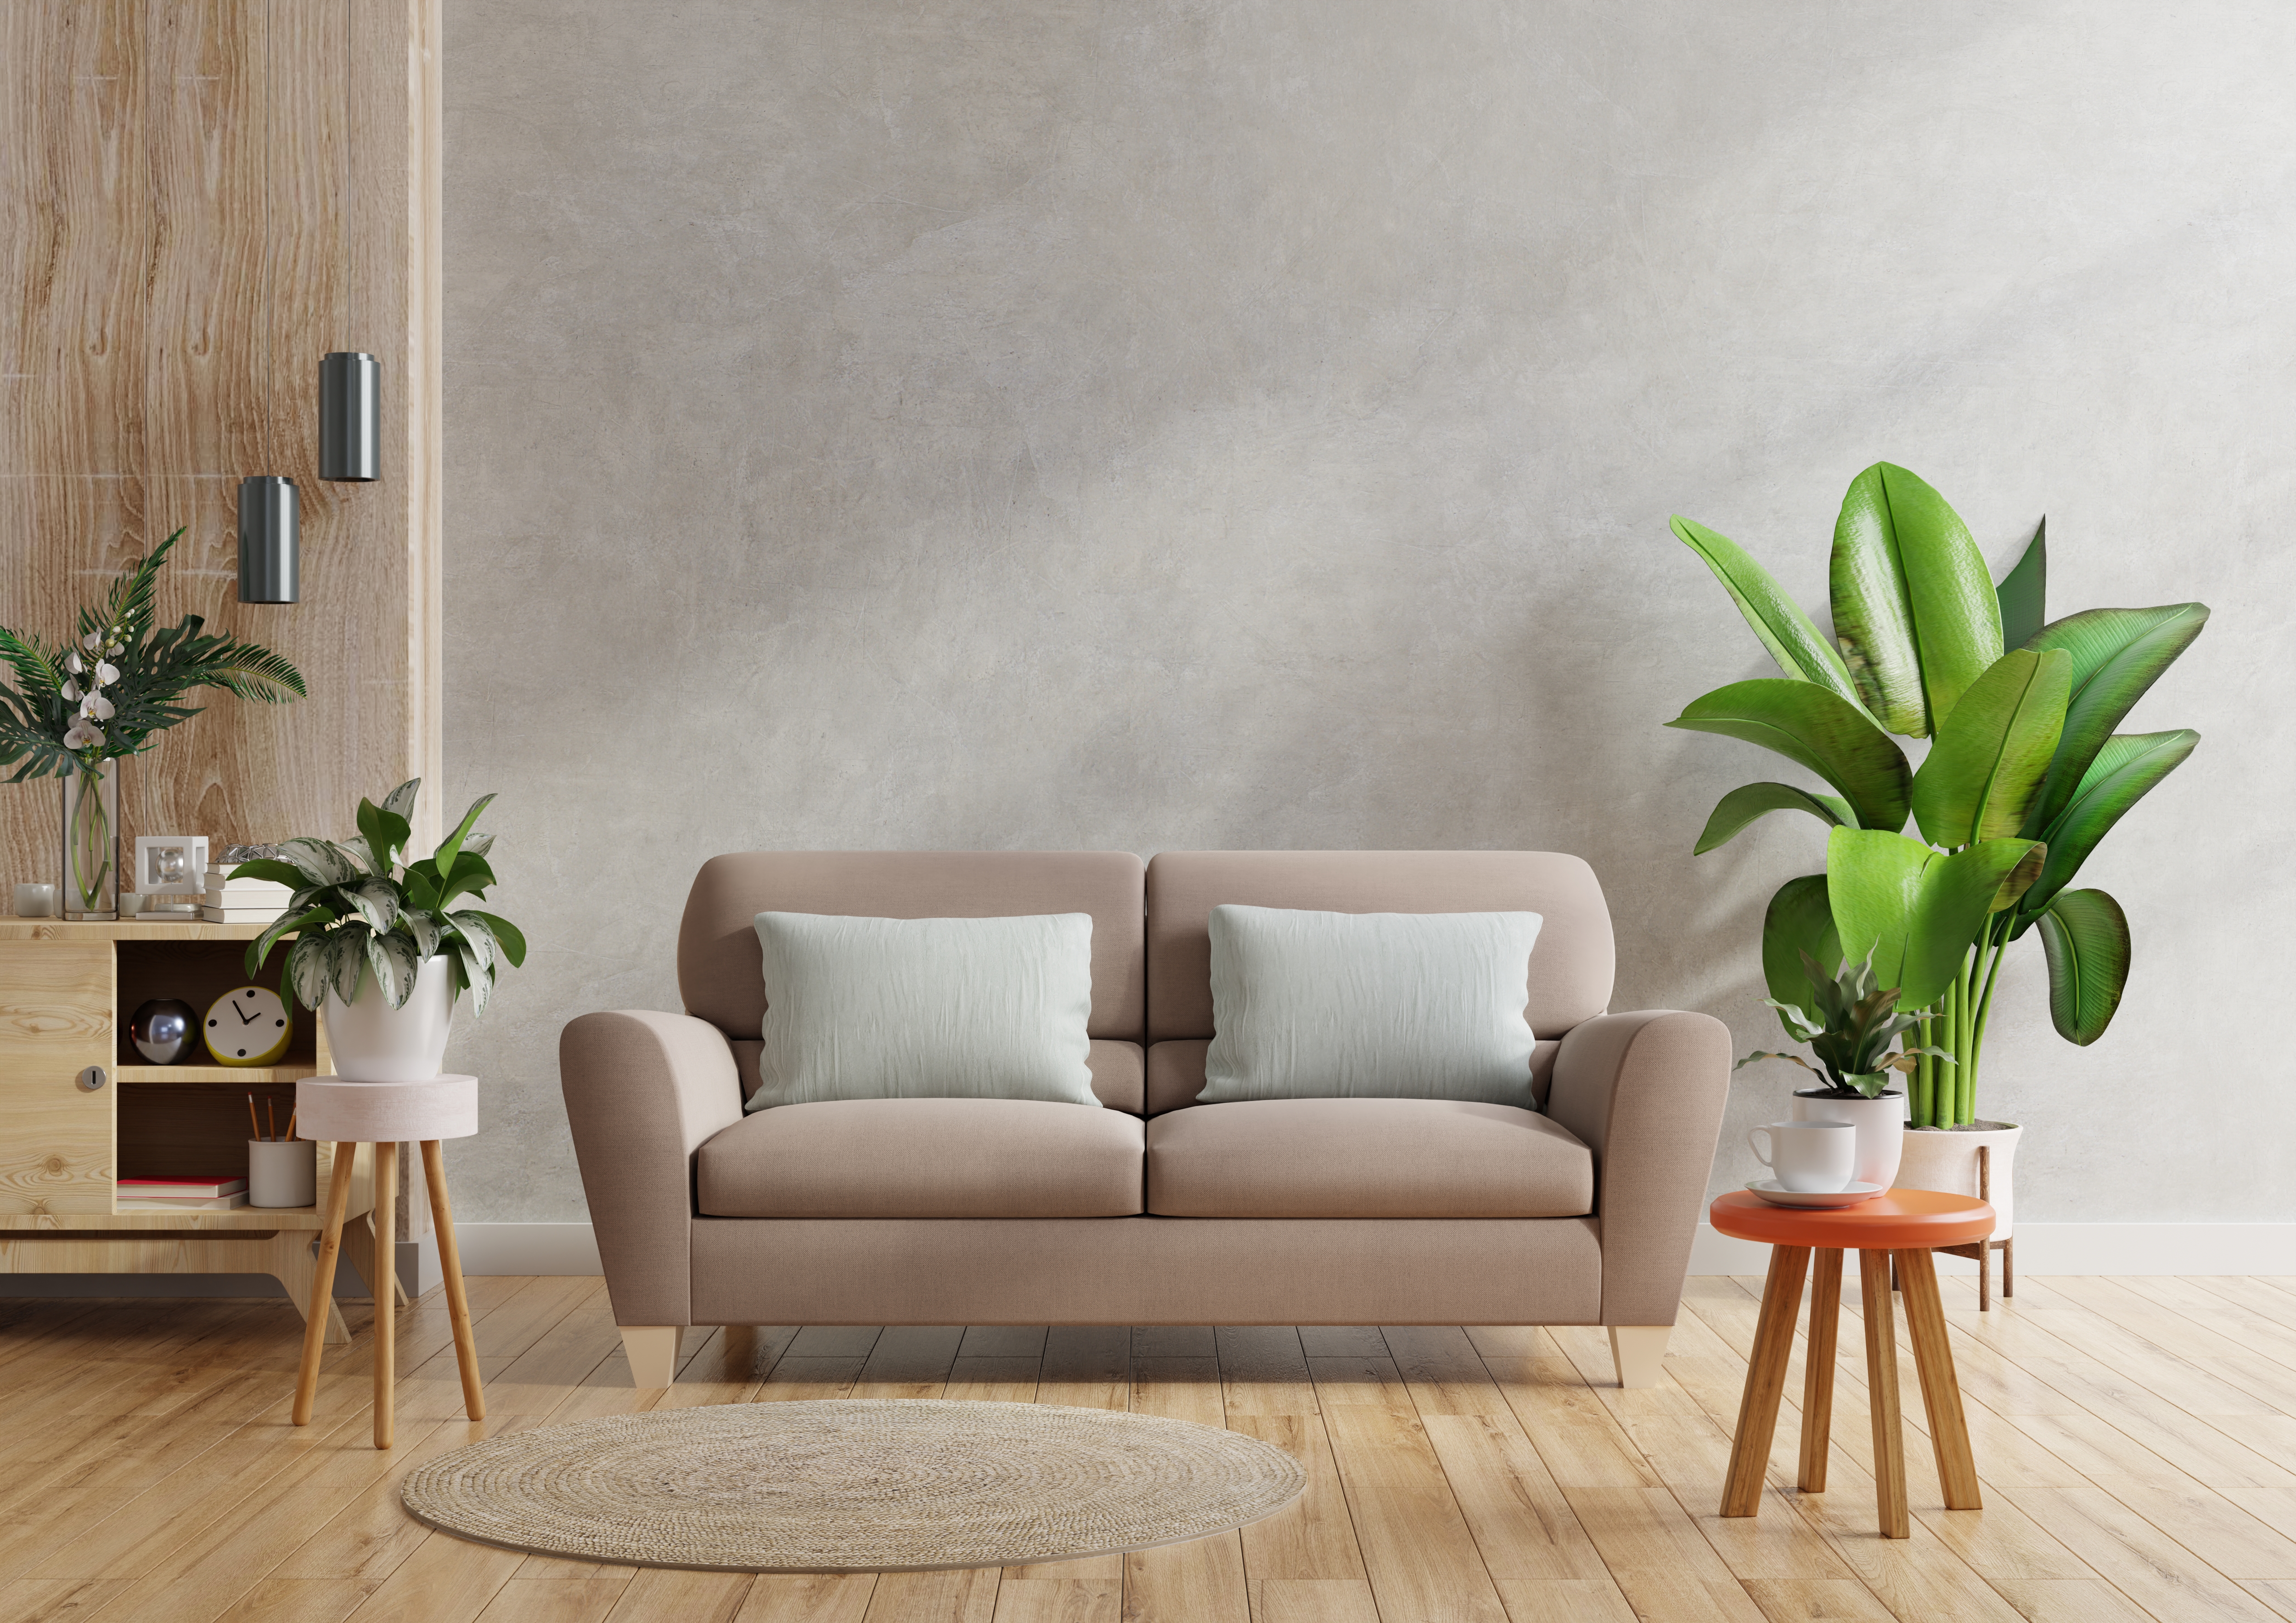 brown-sofa-wooden-table-living-room-interior-with-plant-concrete-wall.jpg